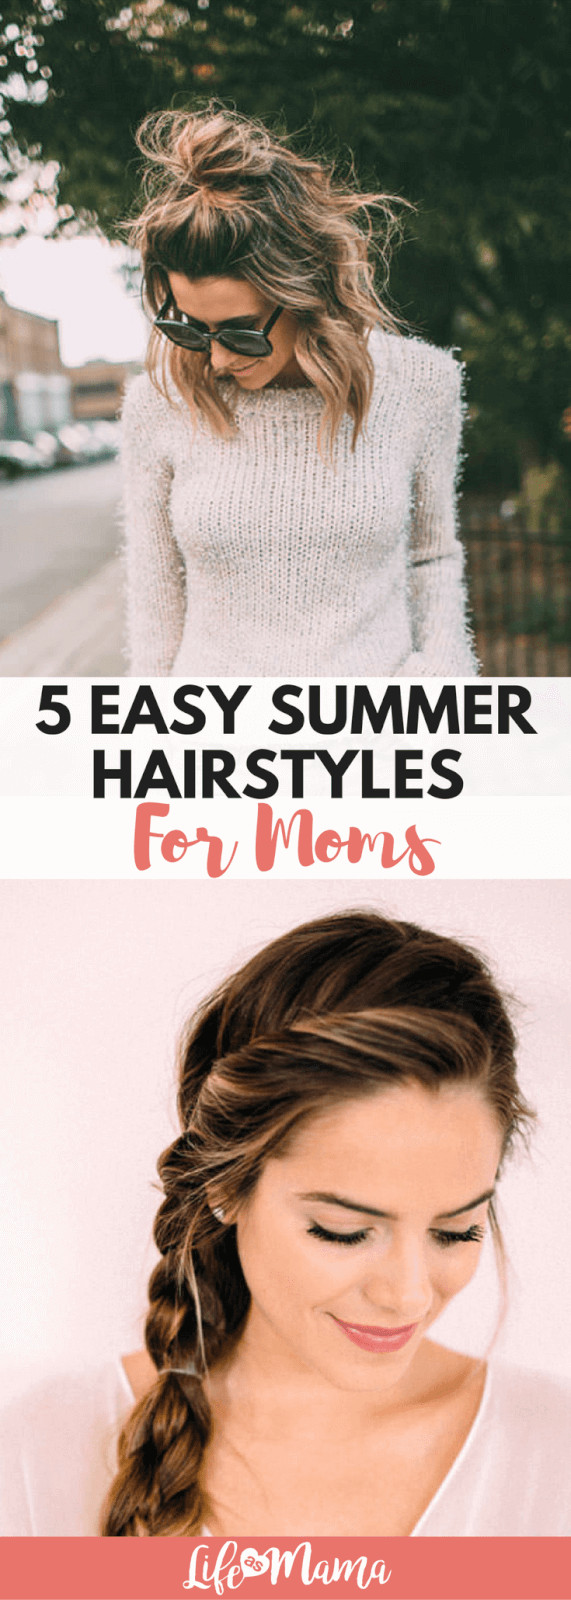 Easy Hairstyles For Mom
 5 Easy Summer Hairstyles For Moms